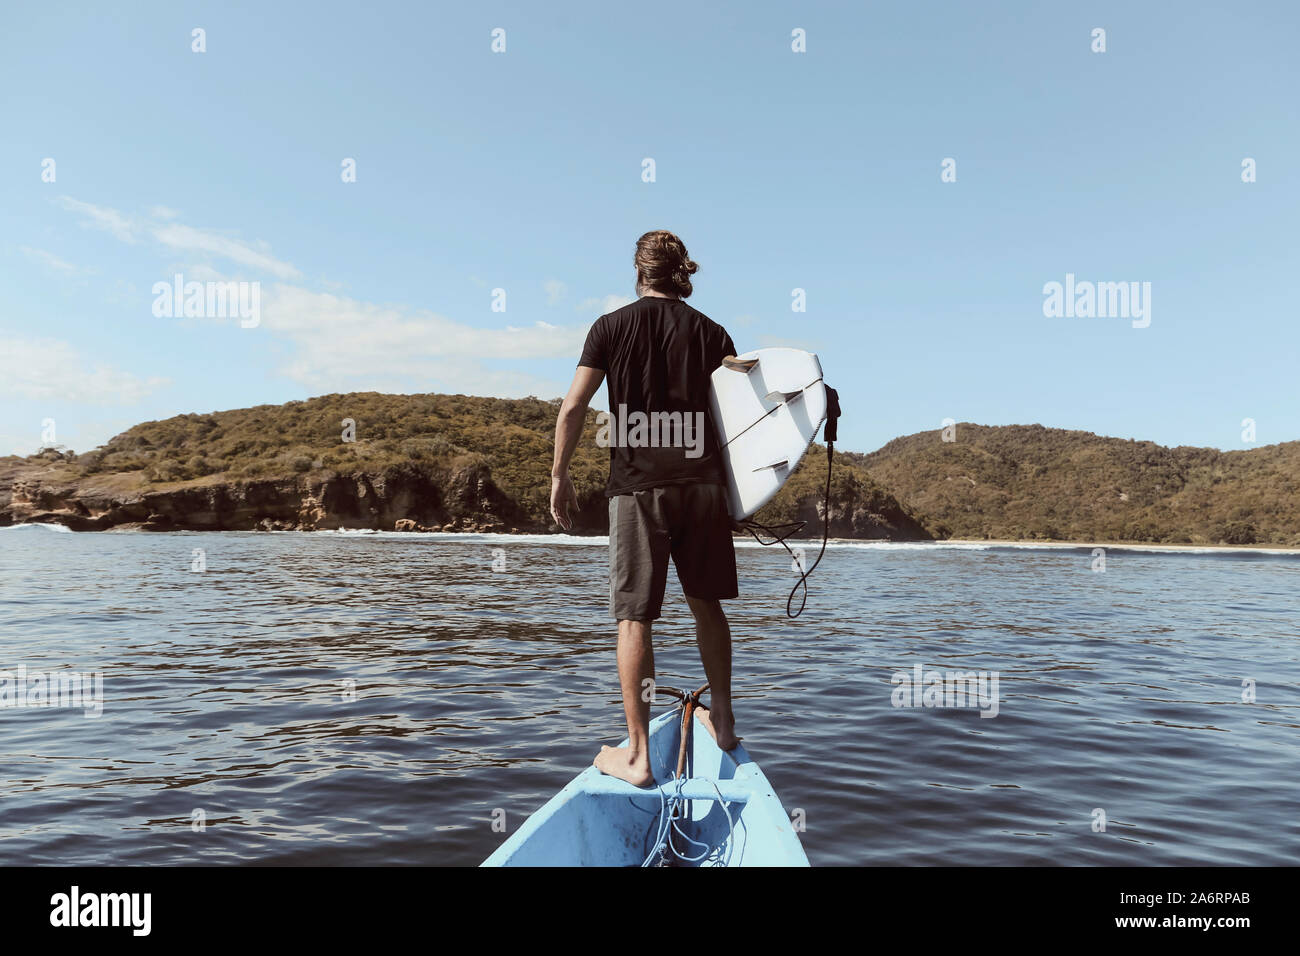 Surfer in a boat Stock Photo